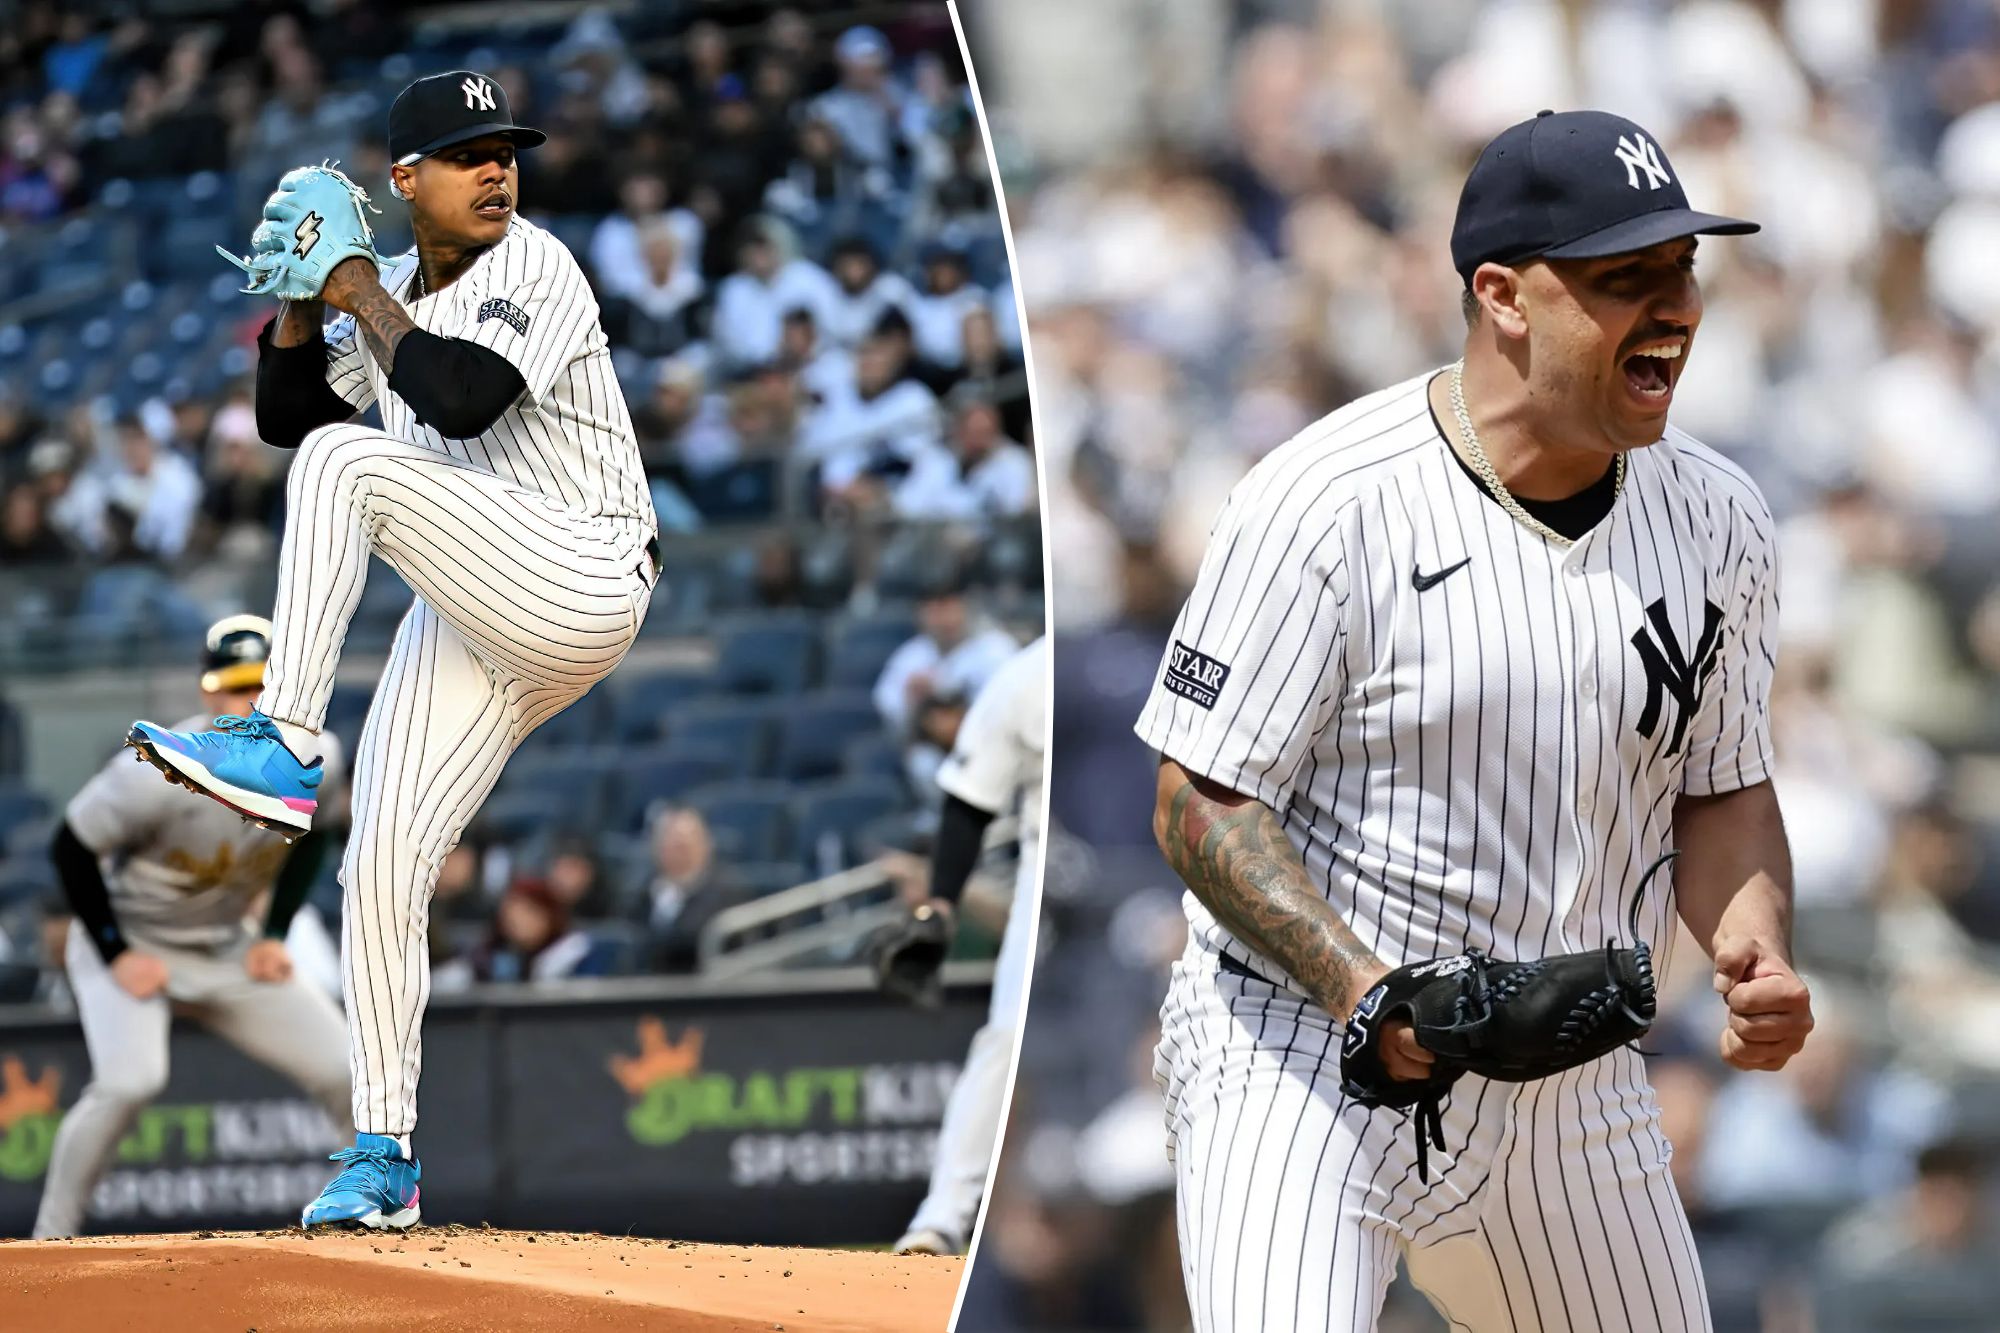 Both Nestor Cortes and Marcus Stroman have used deception to keep hitters off-balance while pitching for the Yankees.